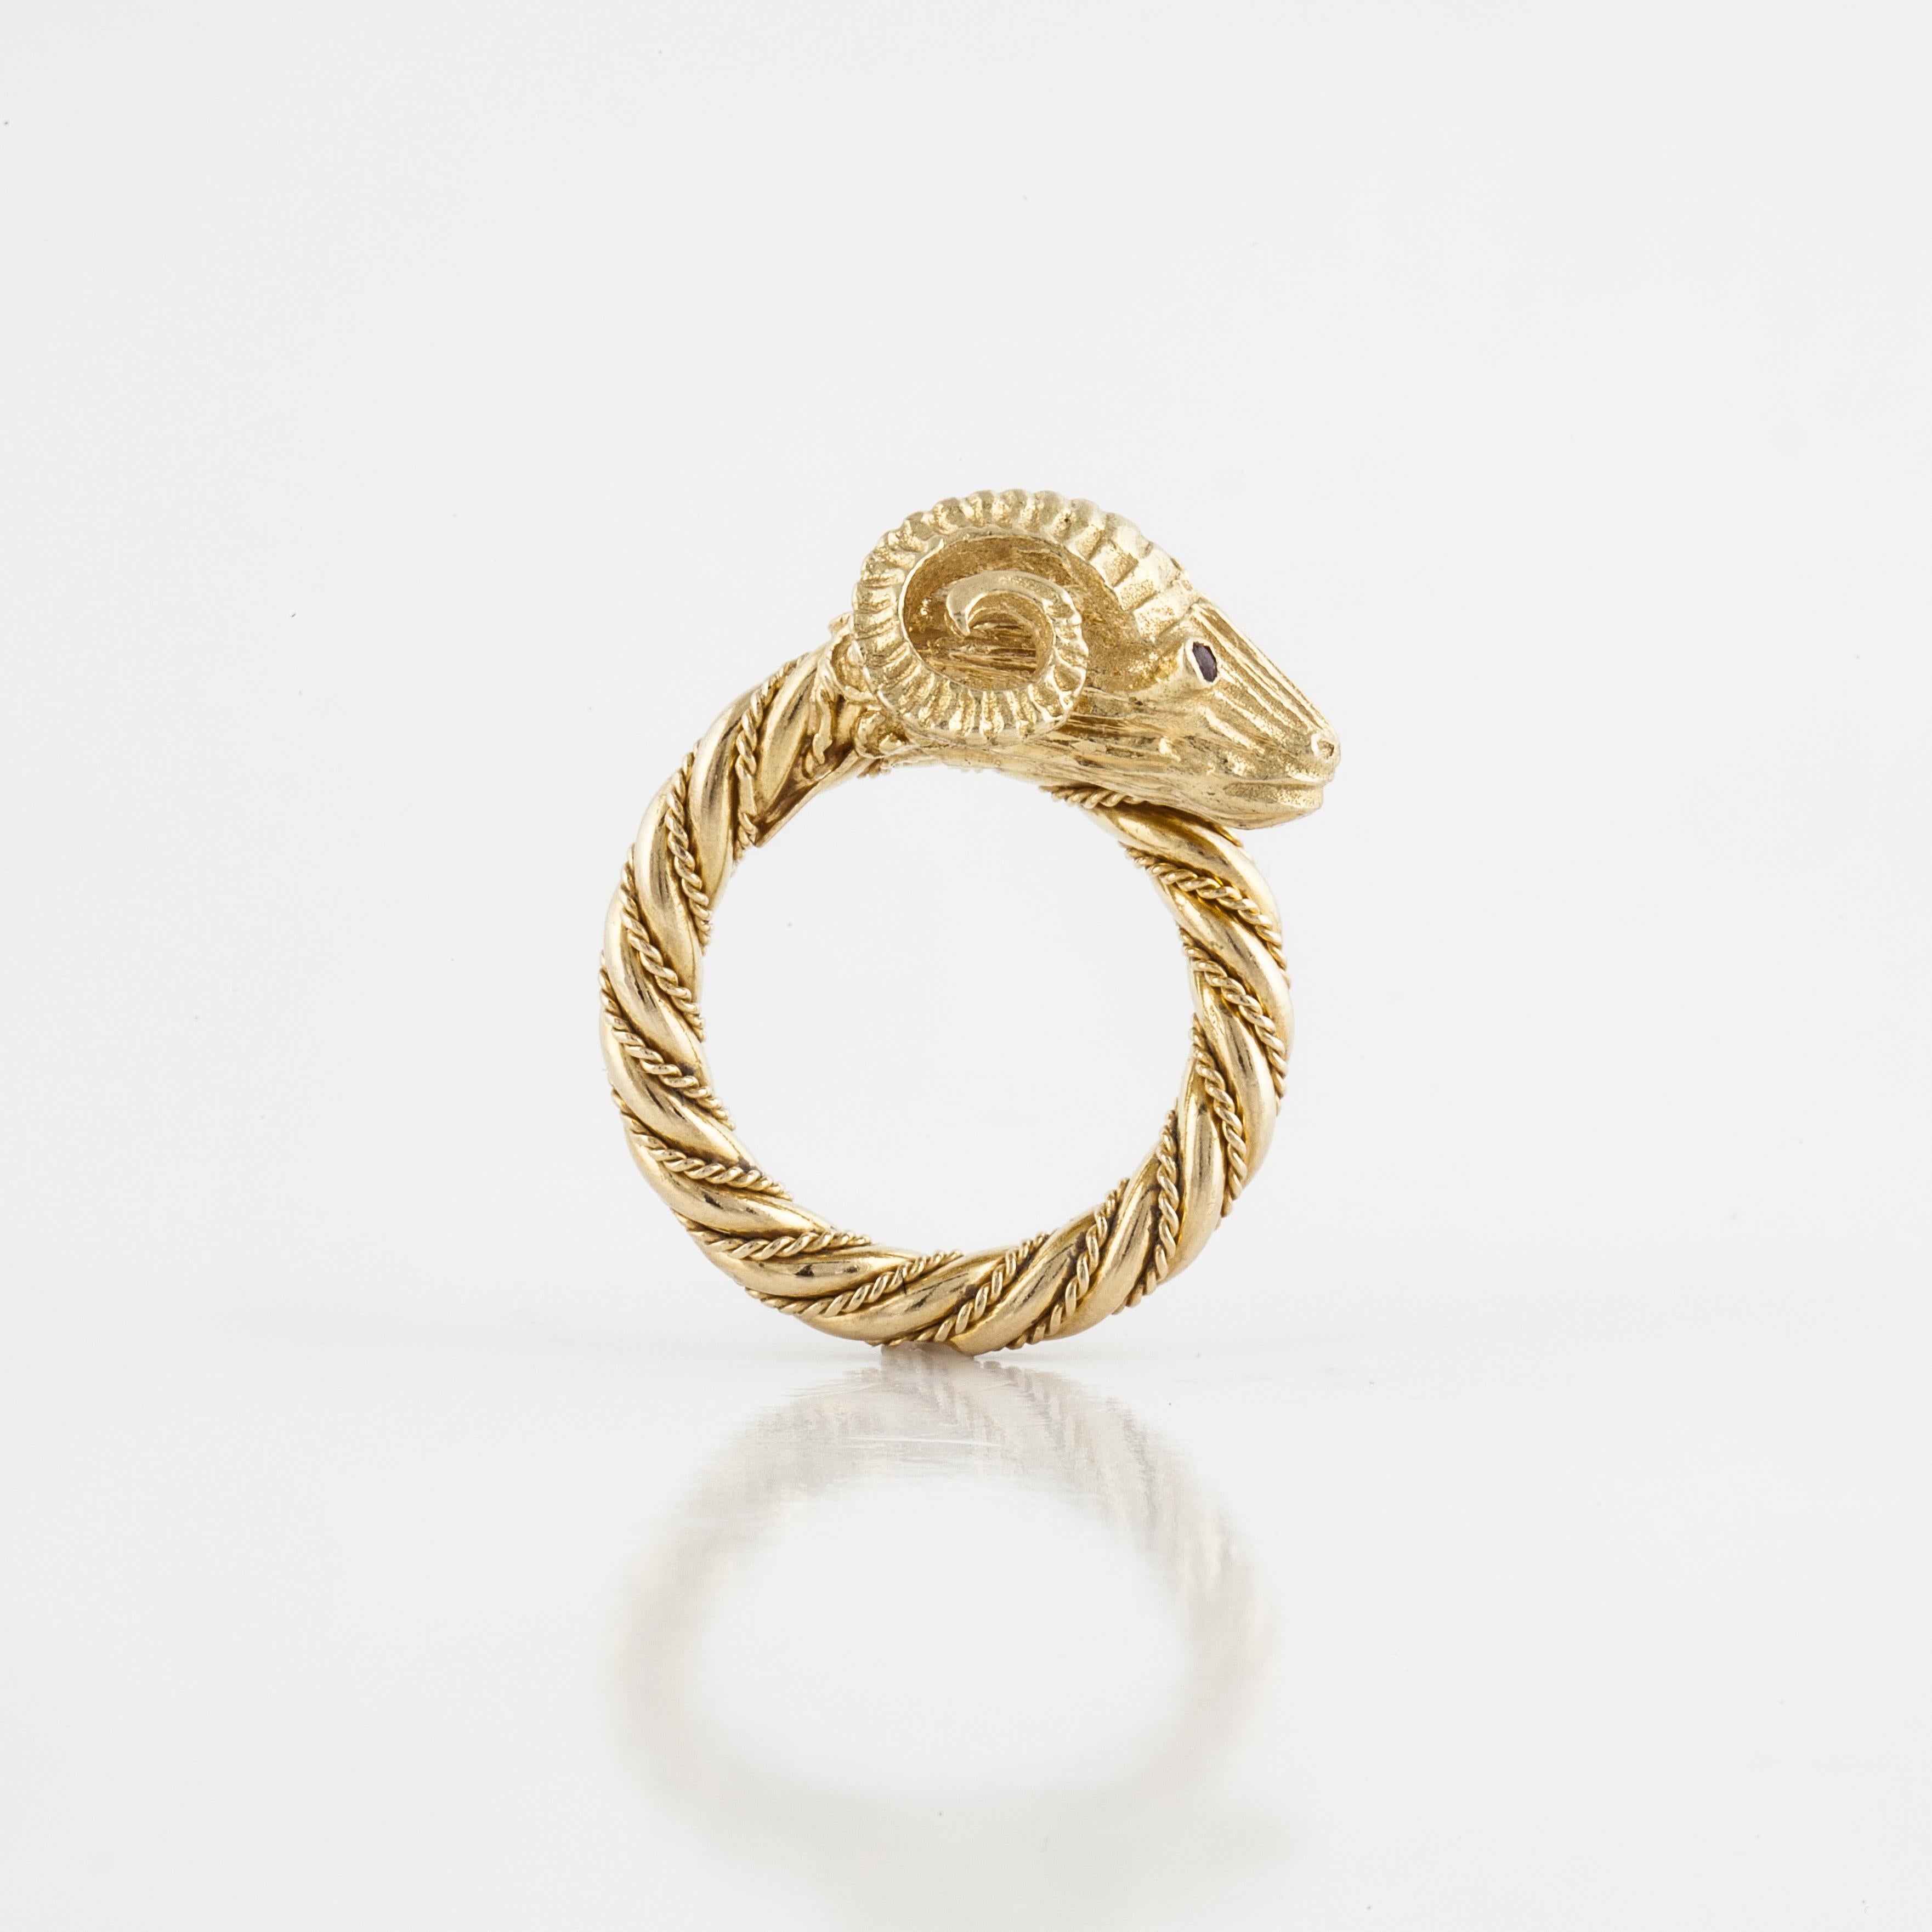 Rams head ring in 18K yellow gold with round ruby eyes. Beautiful detail with the twisted rope band and intricate gold work.  It measures 3/4 inches by 5/8 inches and stands 3/8 inches off the finger.  It is a size 6 and may not be sized.